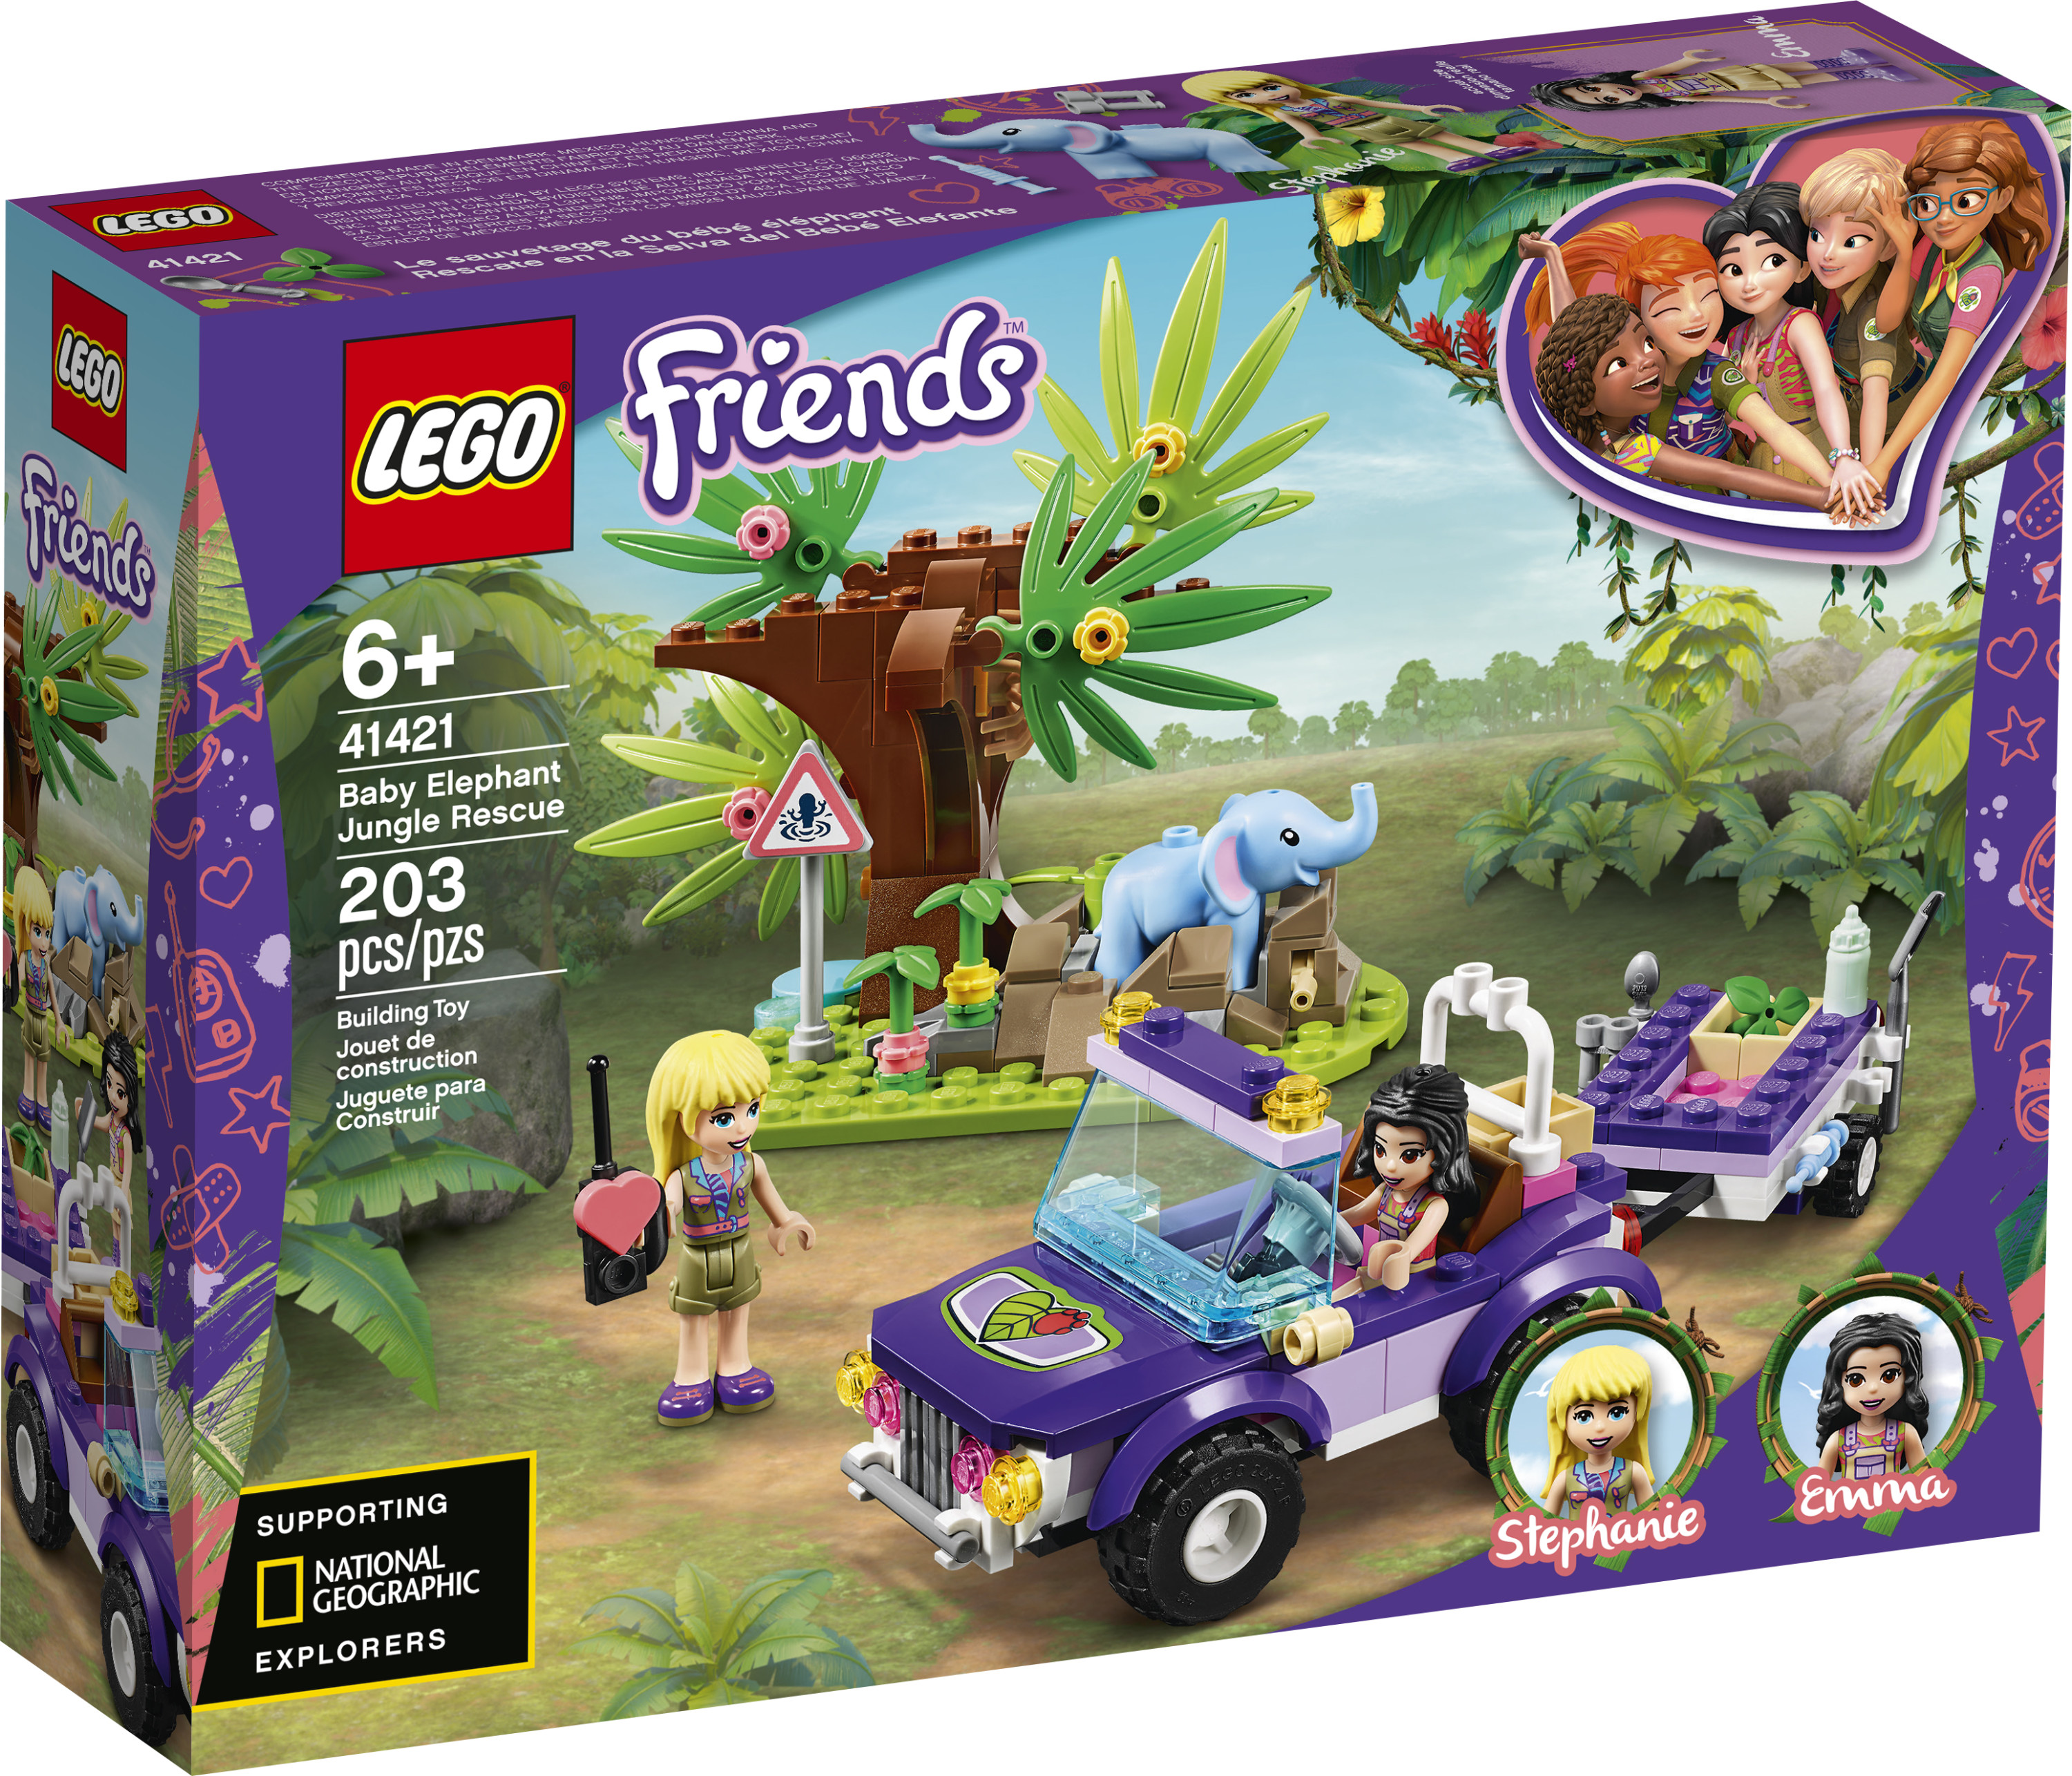 LEGO Friends Baby Elephant Jungle Rescue 41421 Building Toy for Kids; Jungle Rescue Fun Toy Promotes Creative Play (203 Pieces) - image 5 of 8